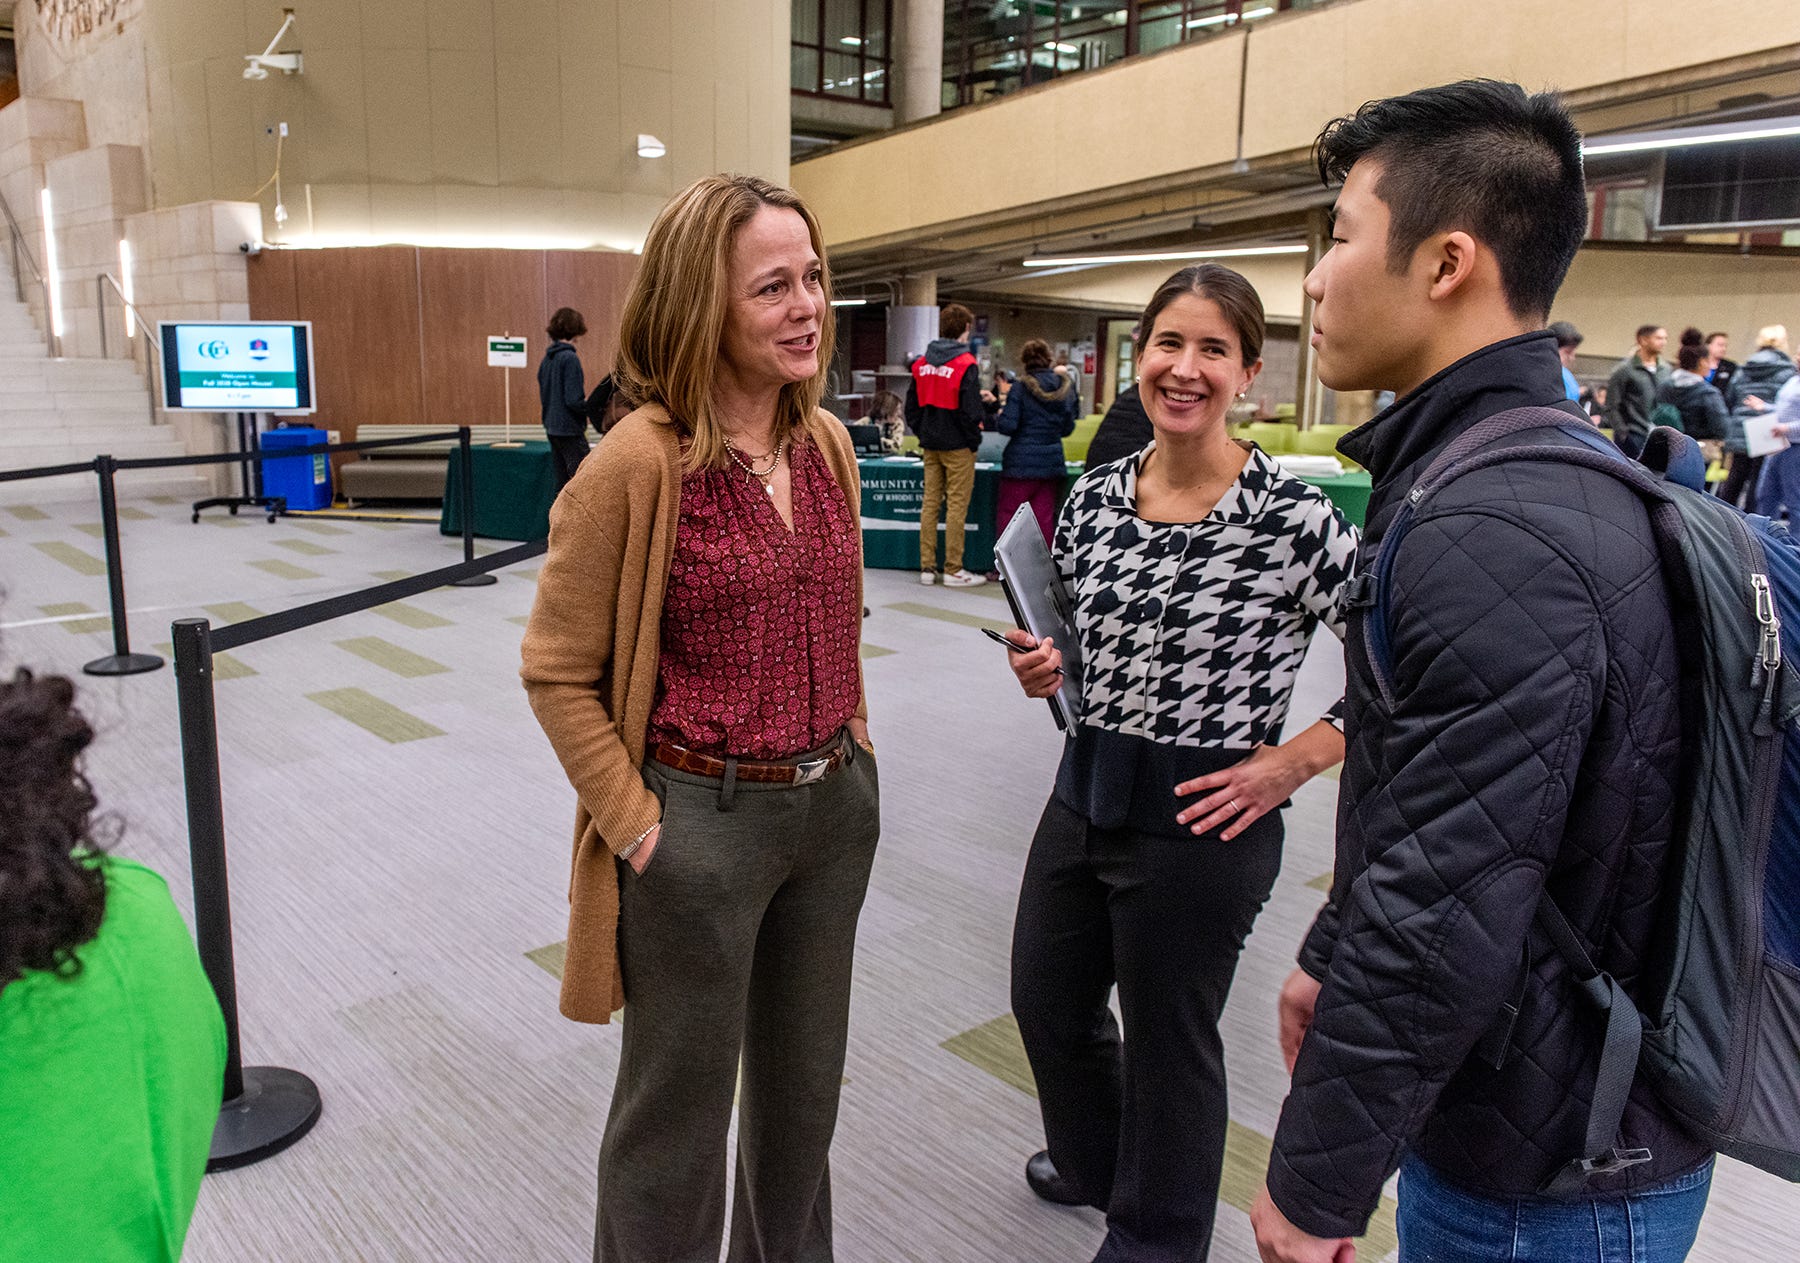 College of Rhode Island President Meghan Hughes, left, and Sara Enright, vice president of Student Affairs and chief outcomes officer, talk with student Andrew Lee during a campus open house event in 2019.